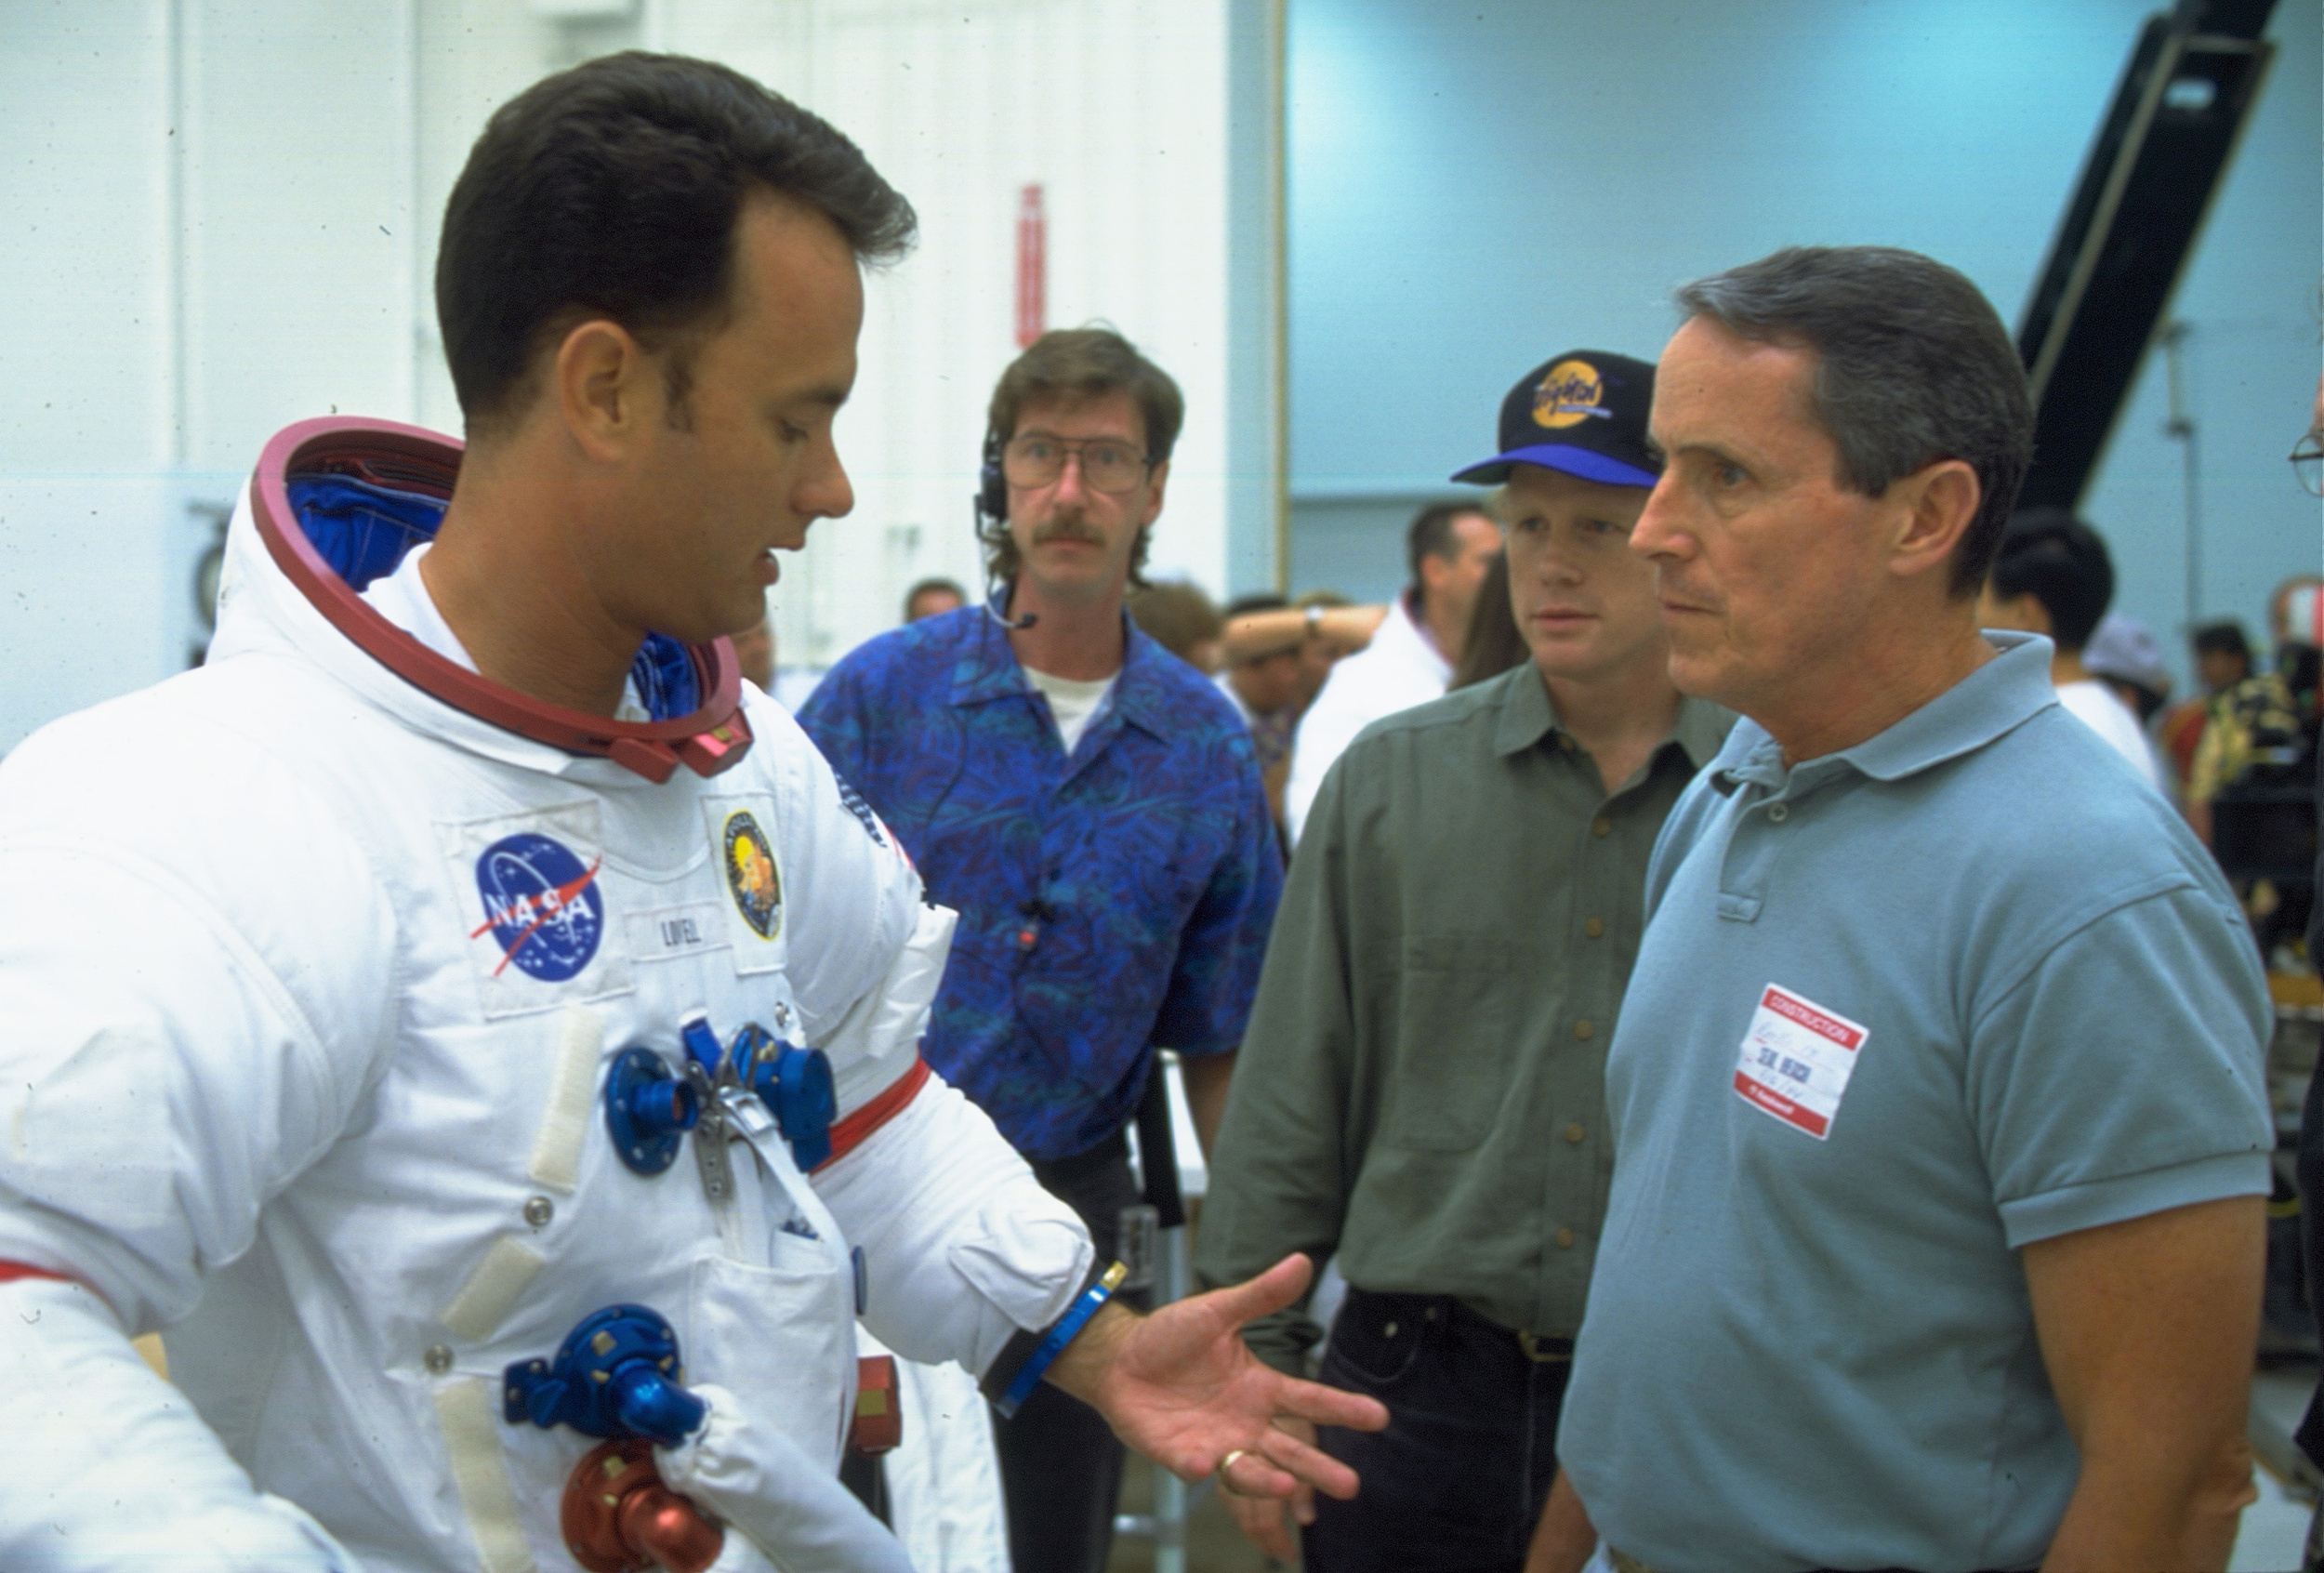 <p>In 1998, HBO released a 12-part miniseries called “From Earth to the Moon,” which tells the story of the Apollo program. It featured Howard as a producer and Hanks as executive producer. In fact, Hanks was quite hands on. He is a credited writer on a few episodes and directed the first one.</p><p><a href='https://www.msn.com/en-us/community/channel/vid-cj9pqbr0vn9in2b6ddcd8sfgpfq6x6utp44fssrv6mc2gtybw0us'>Did you enjoy this slideshow? Follow us on MSN to see more of our exclusive entertainment content.</a></p>